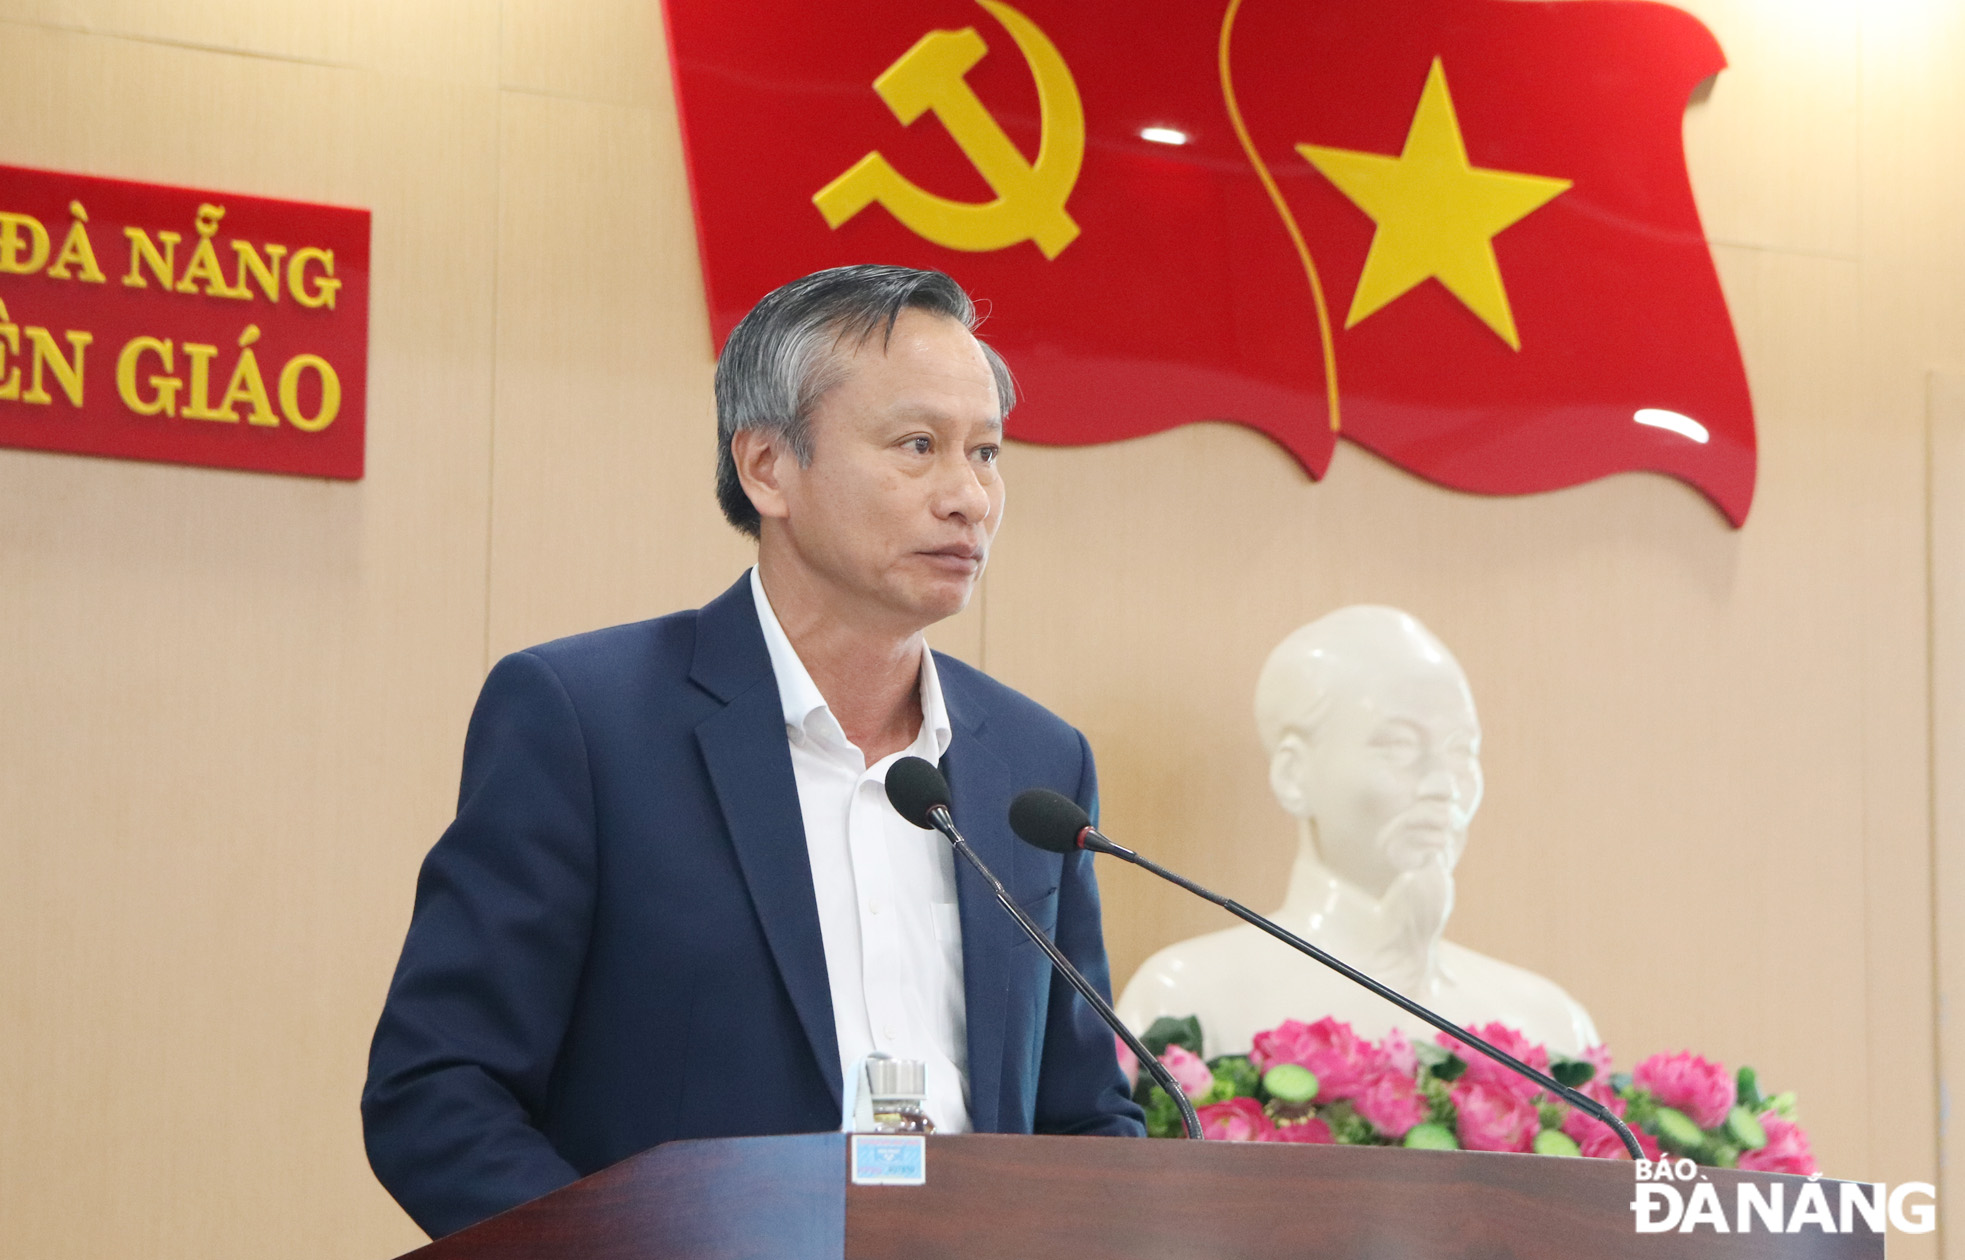 Head of the Party Committee's Publicity and Training Department Doan Ngoc Hung Anh at the meeting